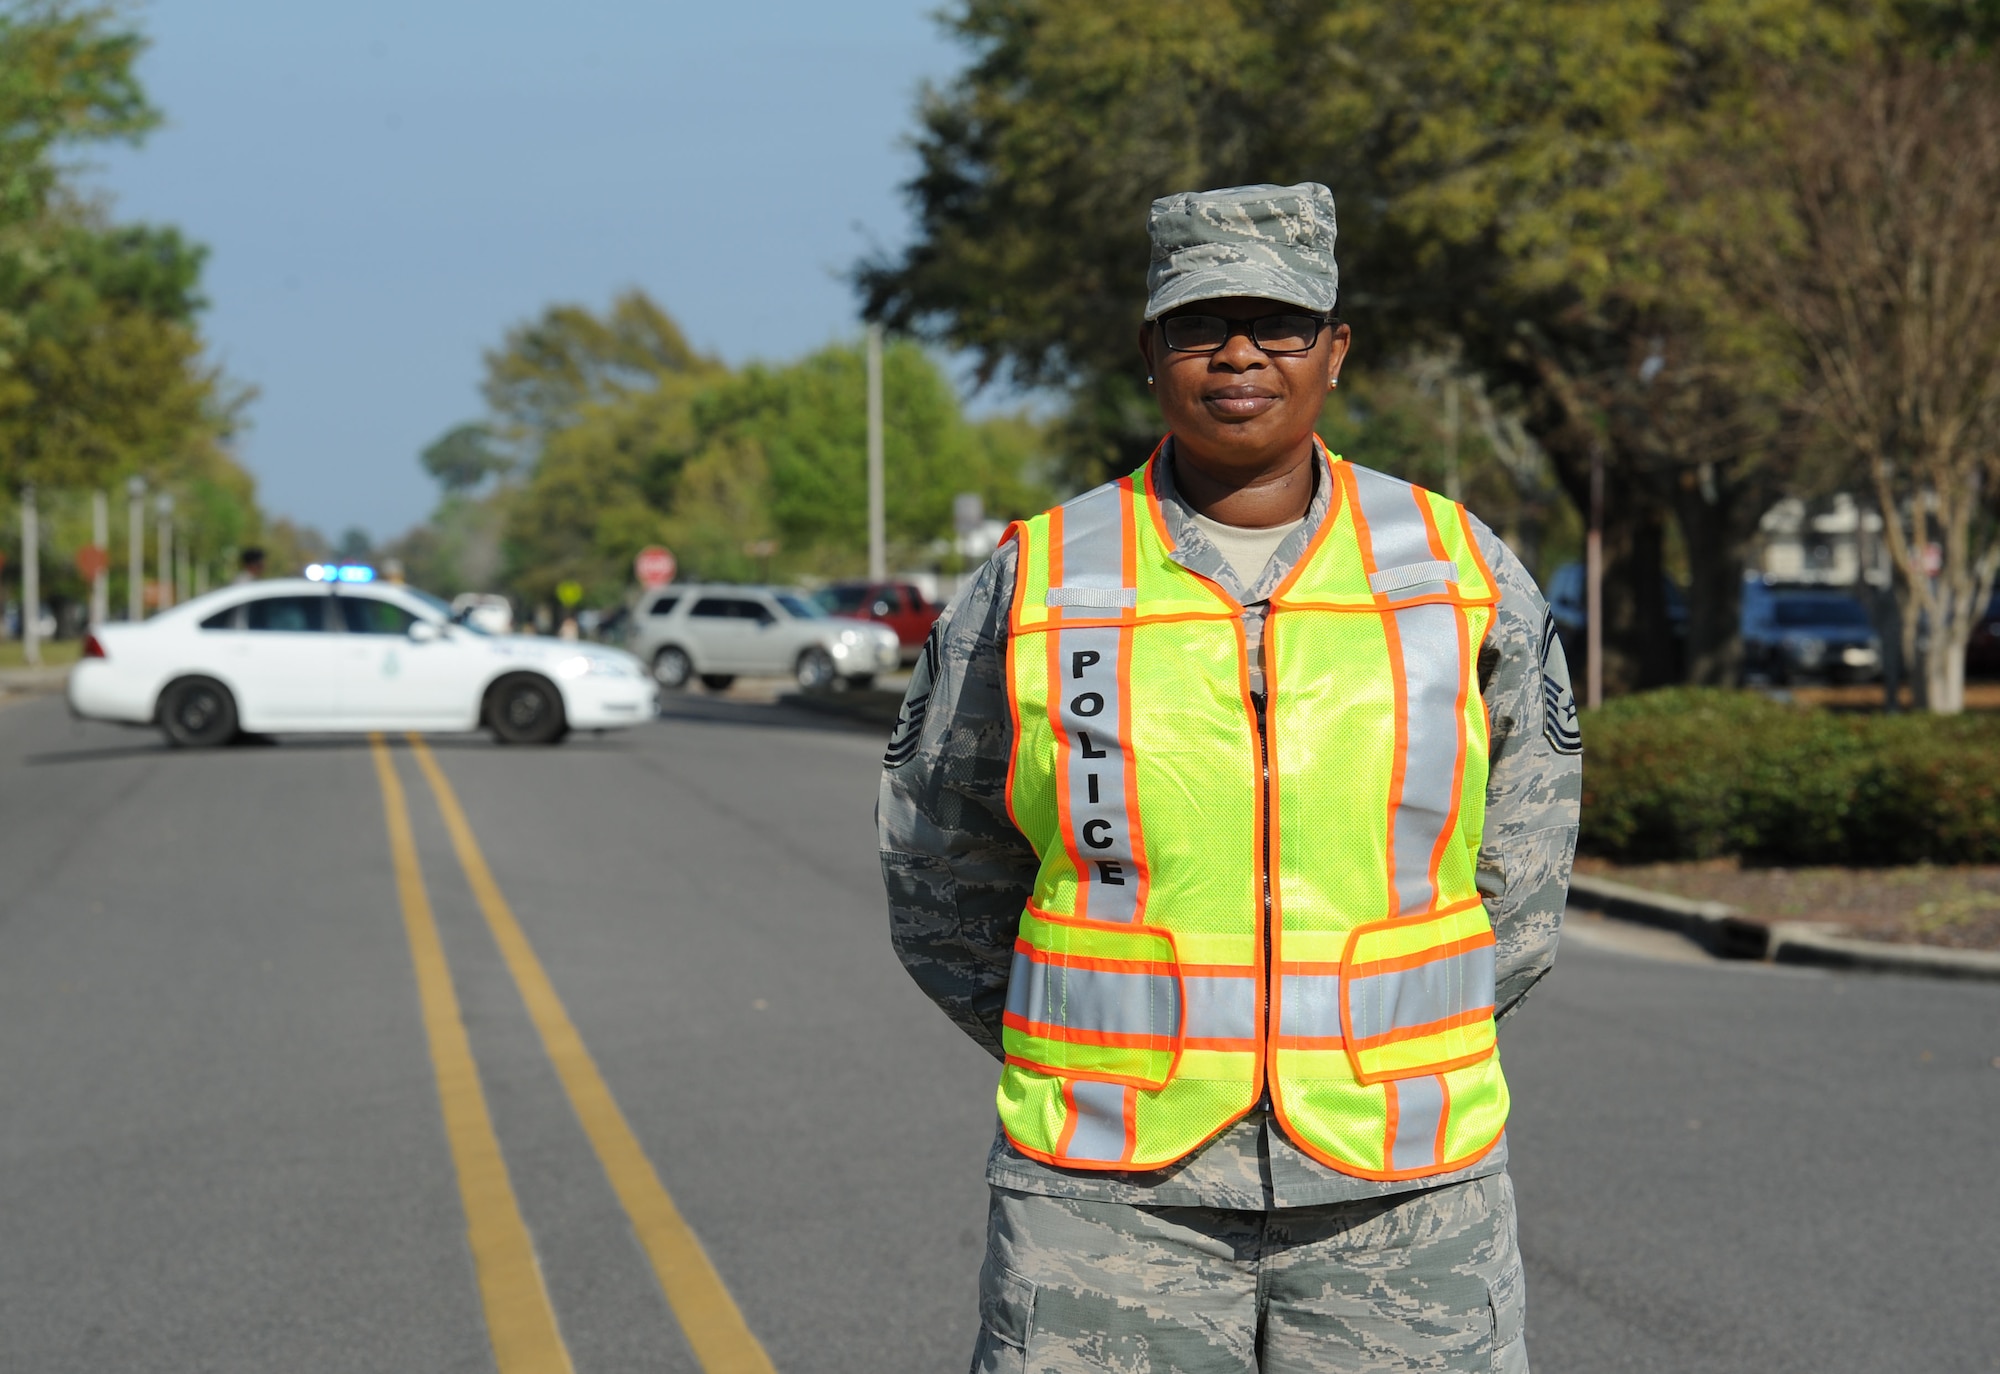 Senior Master Sgt. Lacreshia Trapp, 81st Communications Squadron superintendent, fulfills road guard duties during a Women’s History Month all-female retreat ceremony March 21, 2017, on Keesler Air Force Base, Miss. The theme of 2017 WHM is “Honoring Trailblazing Women in Labor and Business” to honor women who have successfully challenged the female role in business and the paid labor force. (U.S. Air Force photo by Kemberly Groue)